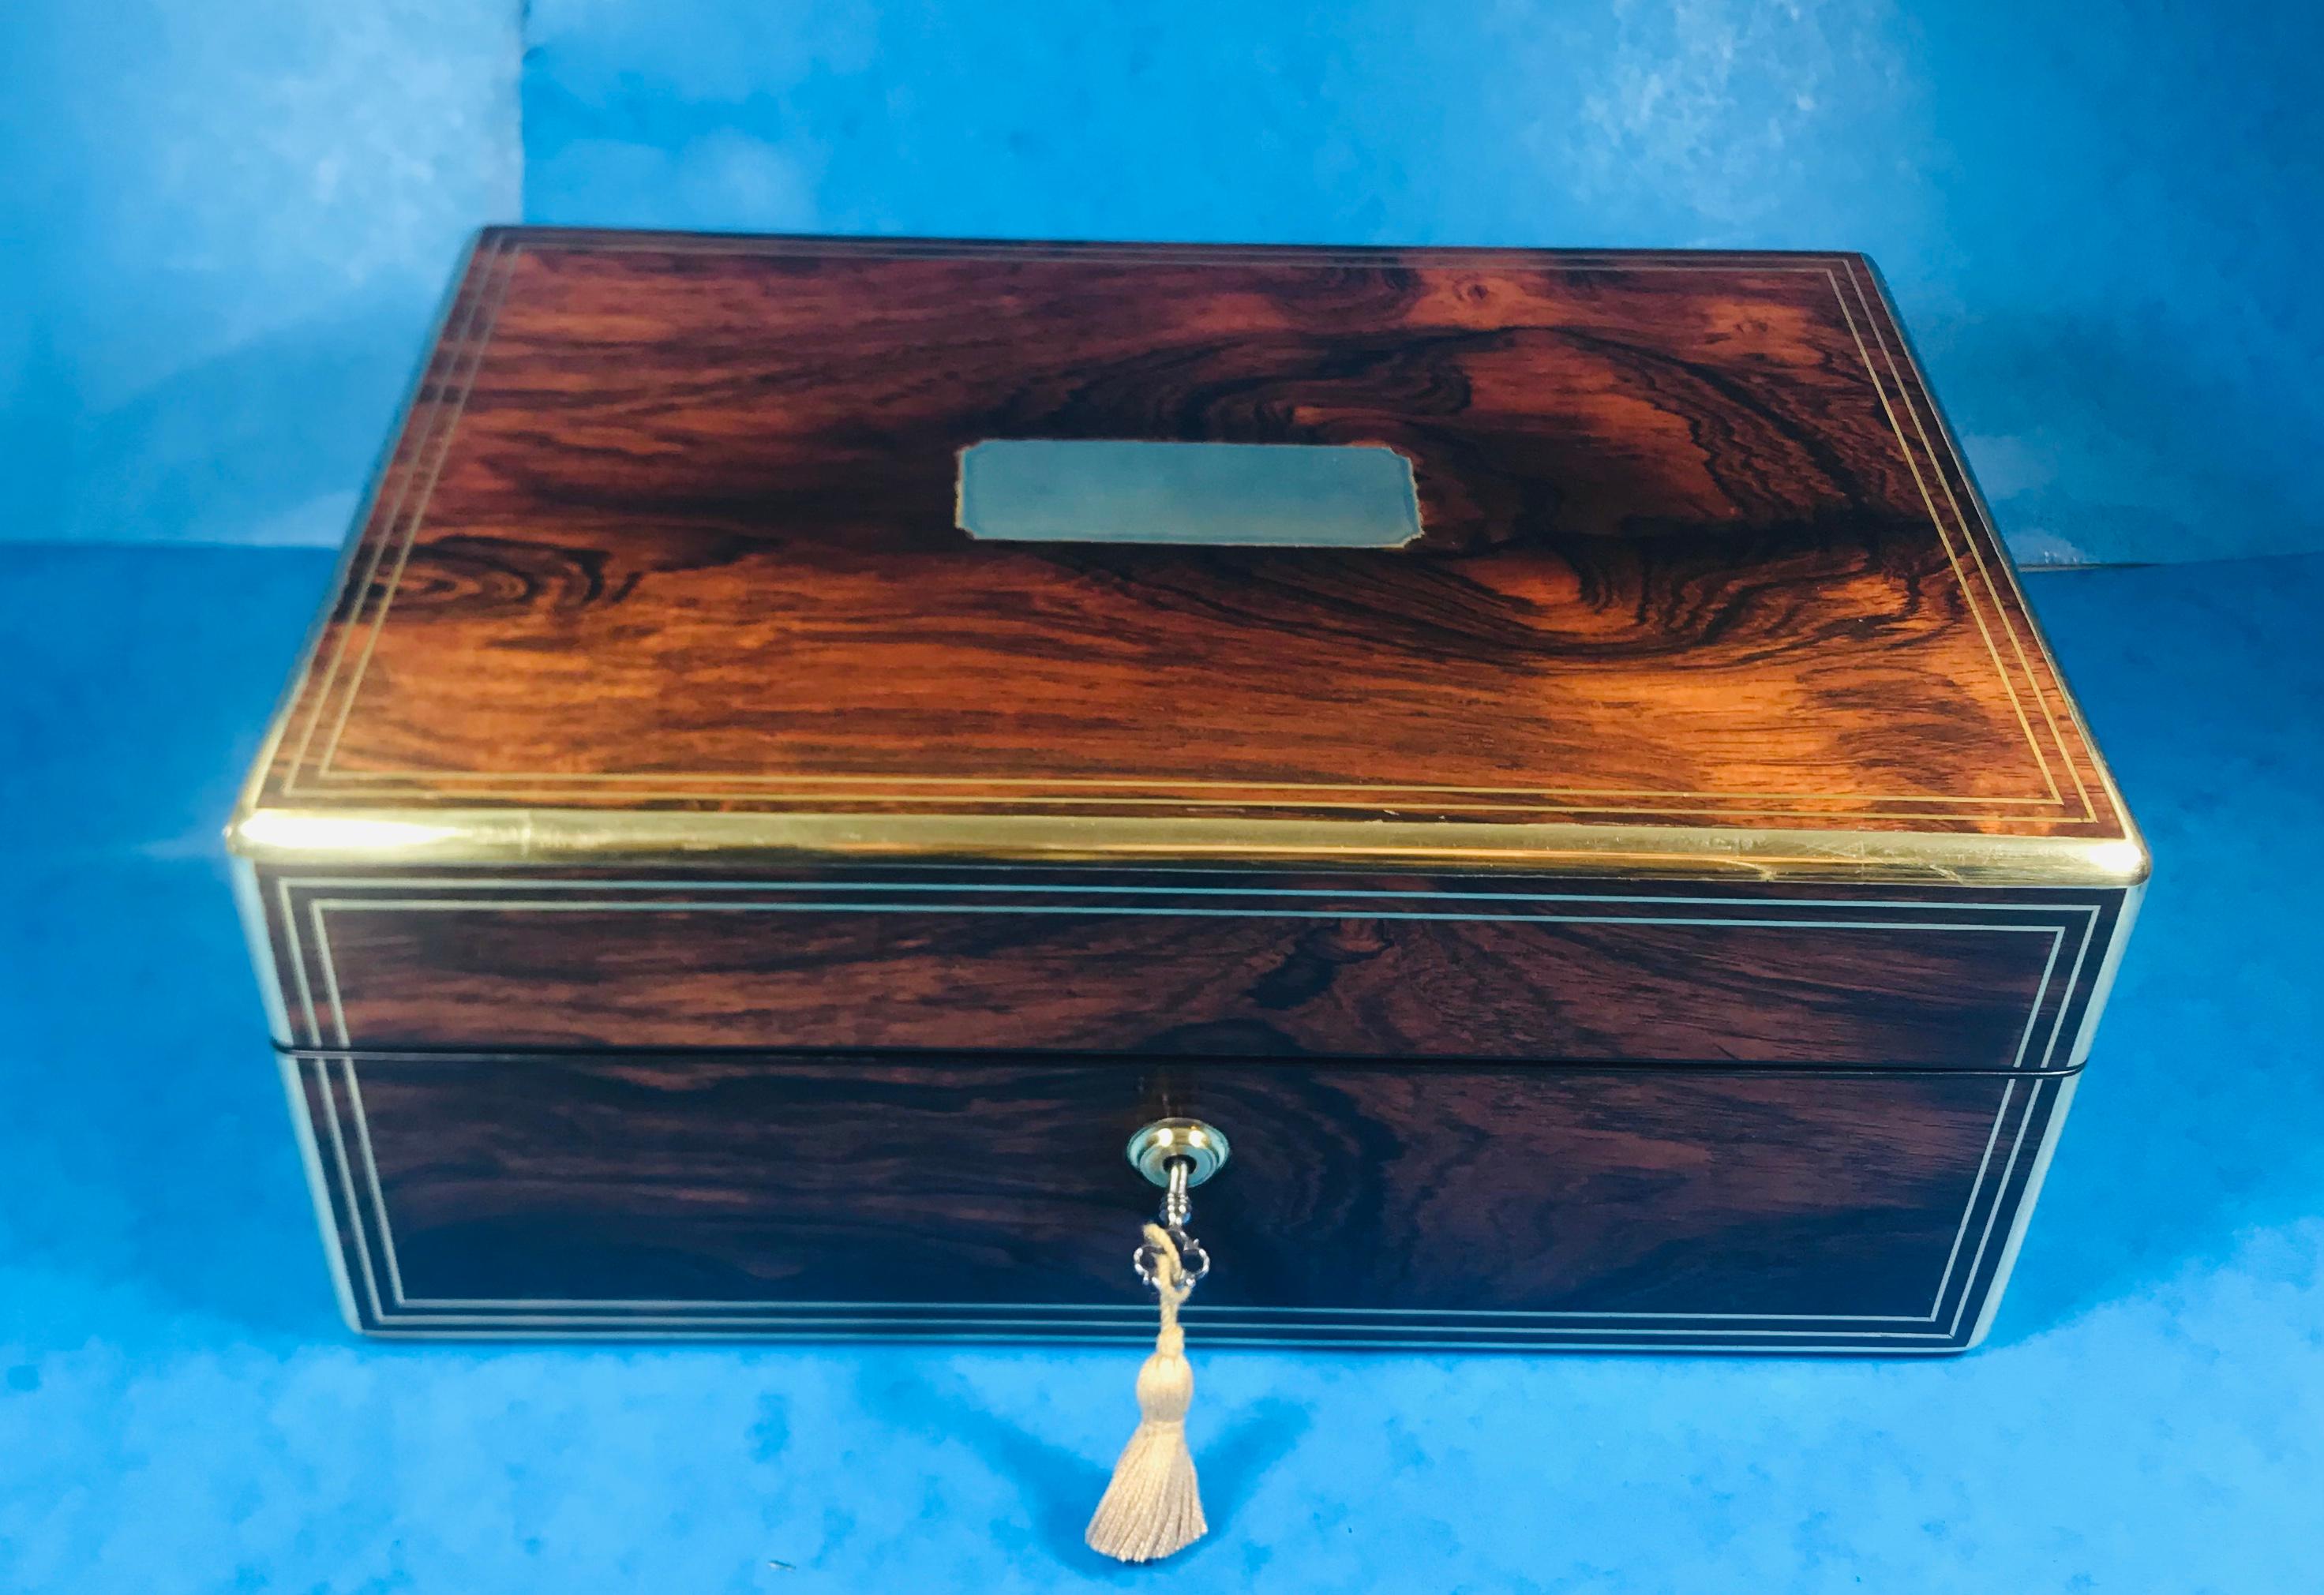 Georgian Rosewood Jewellery Box In Good Condition For Sale In Windsor, Berkshire